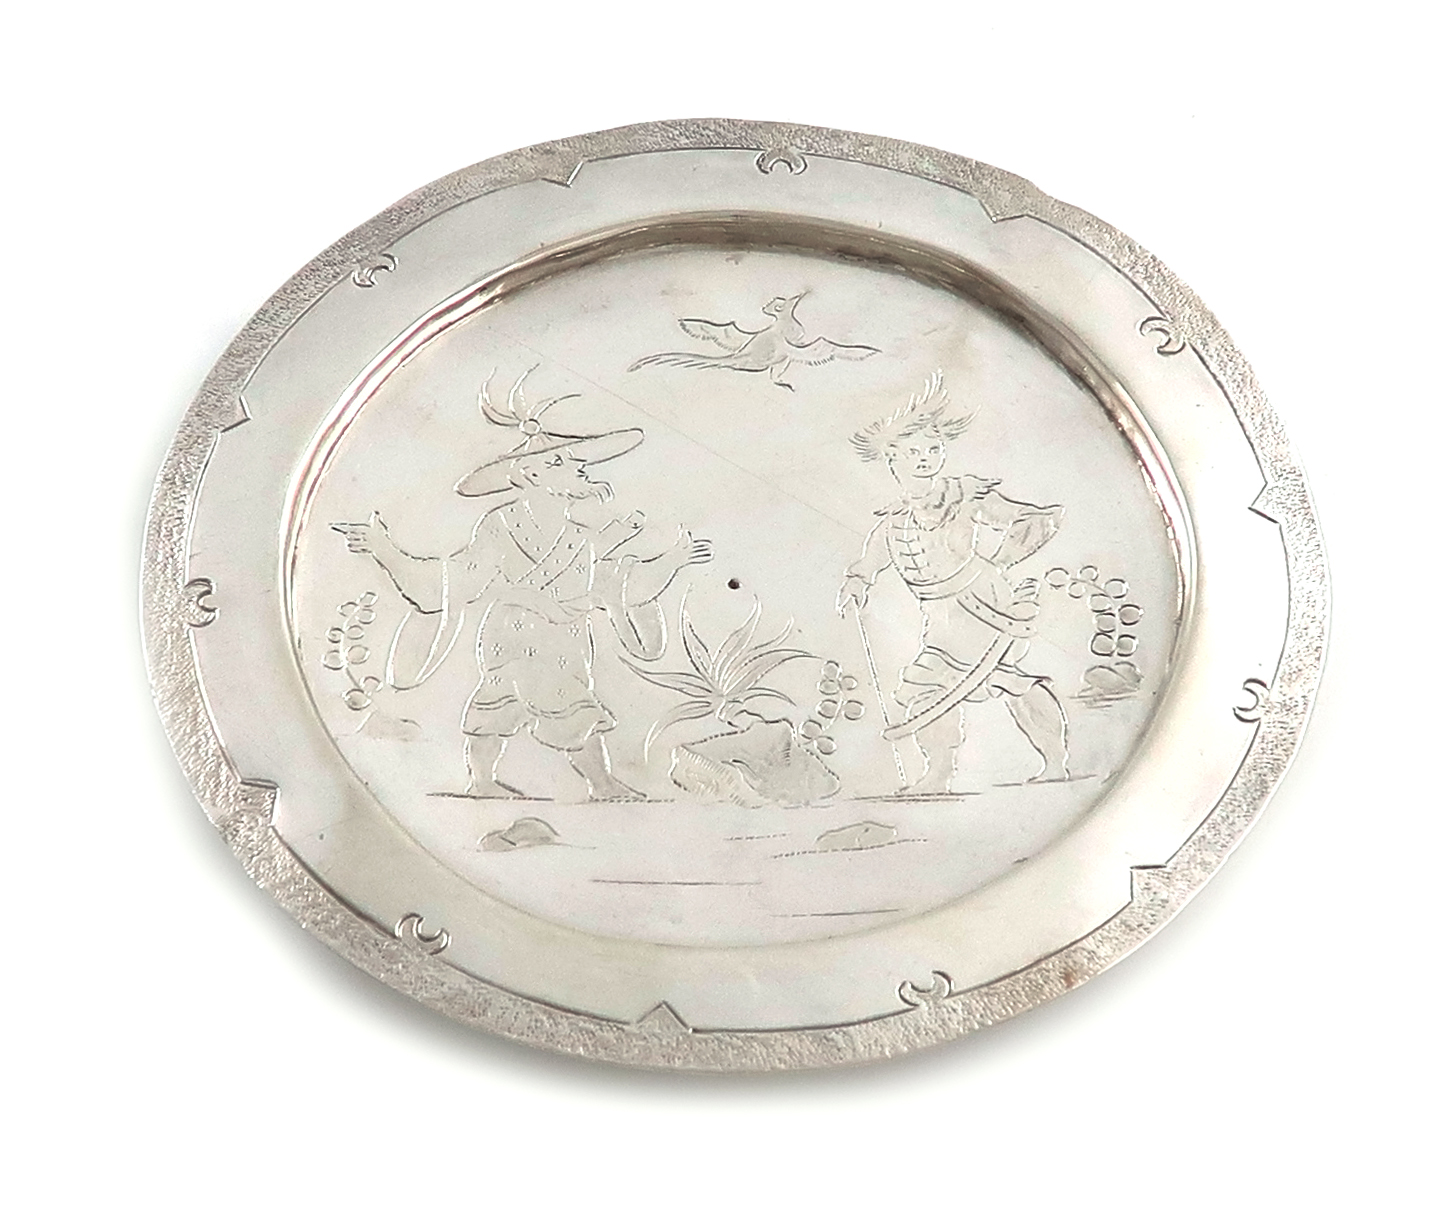 A late 17th century silver West Country paten or small footed dish in the Chinoiserie manner, by